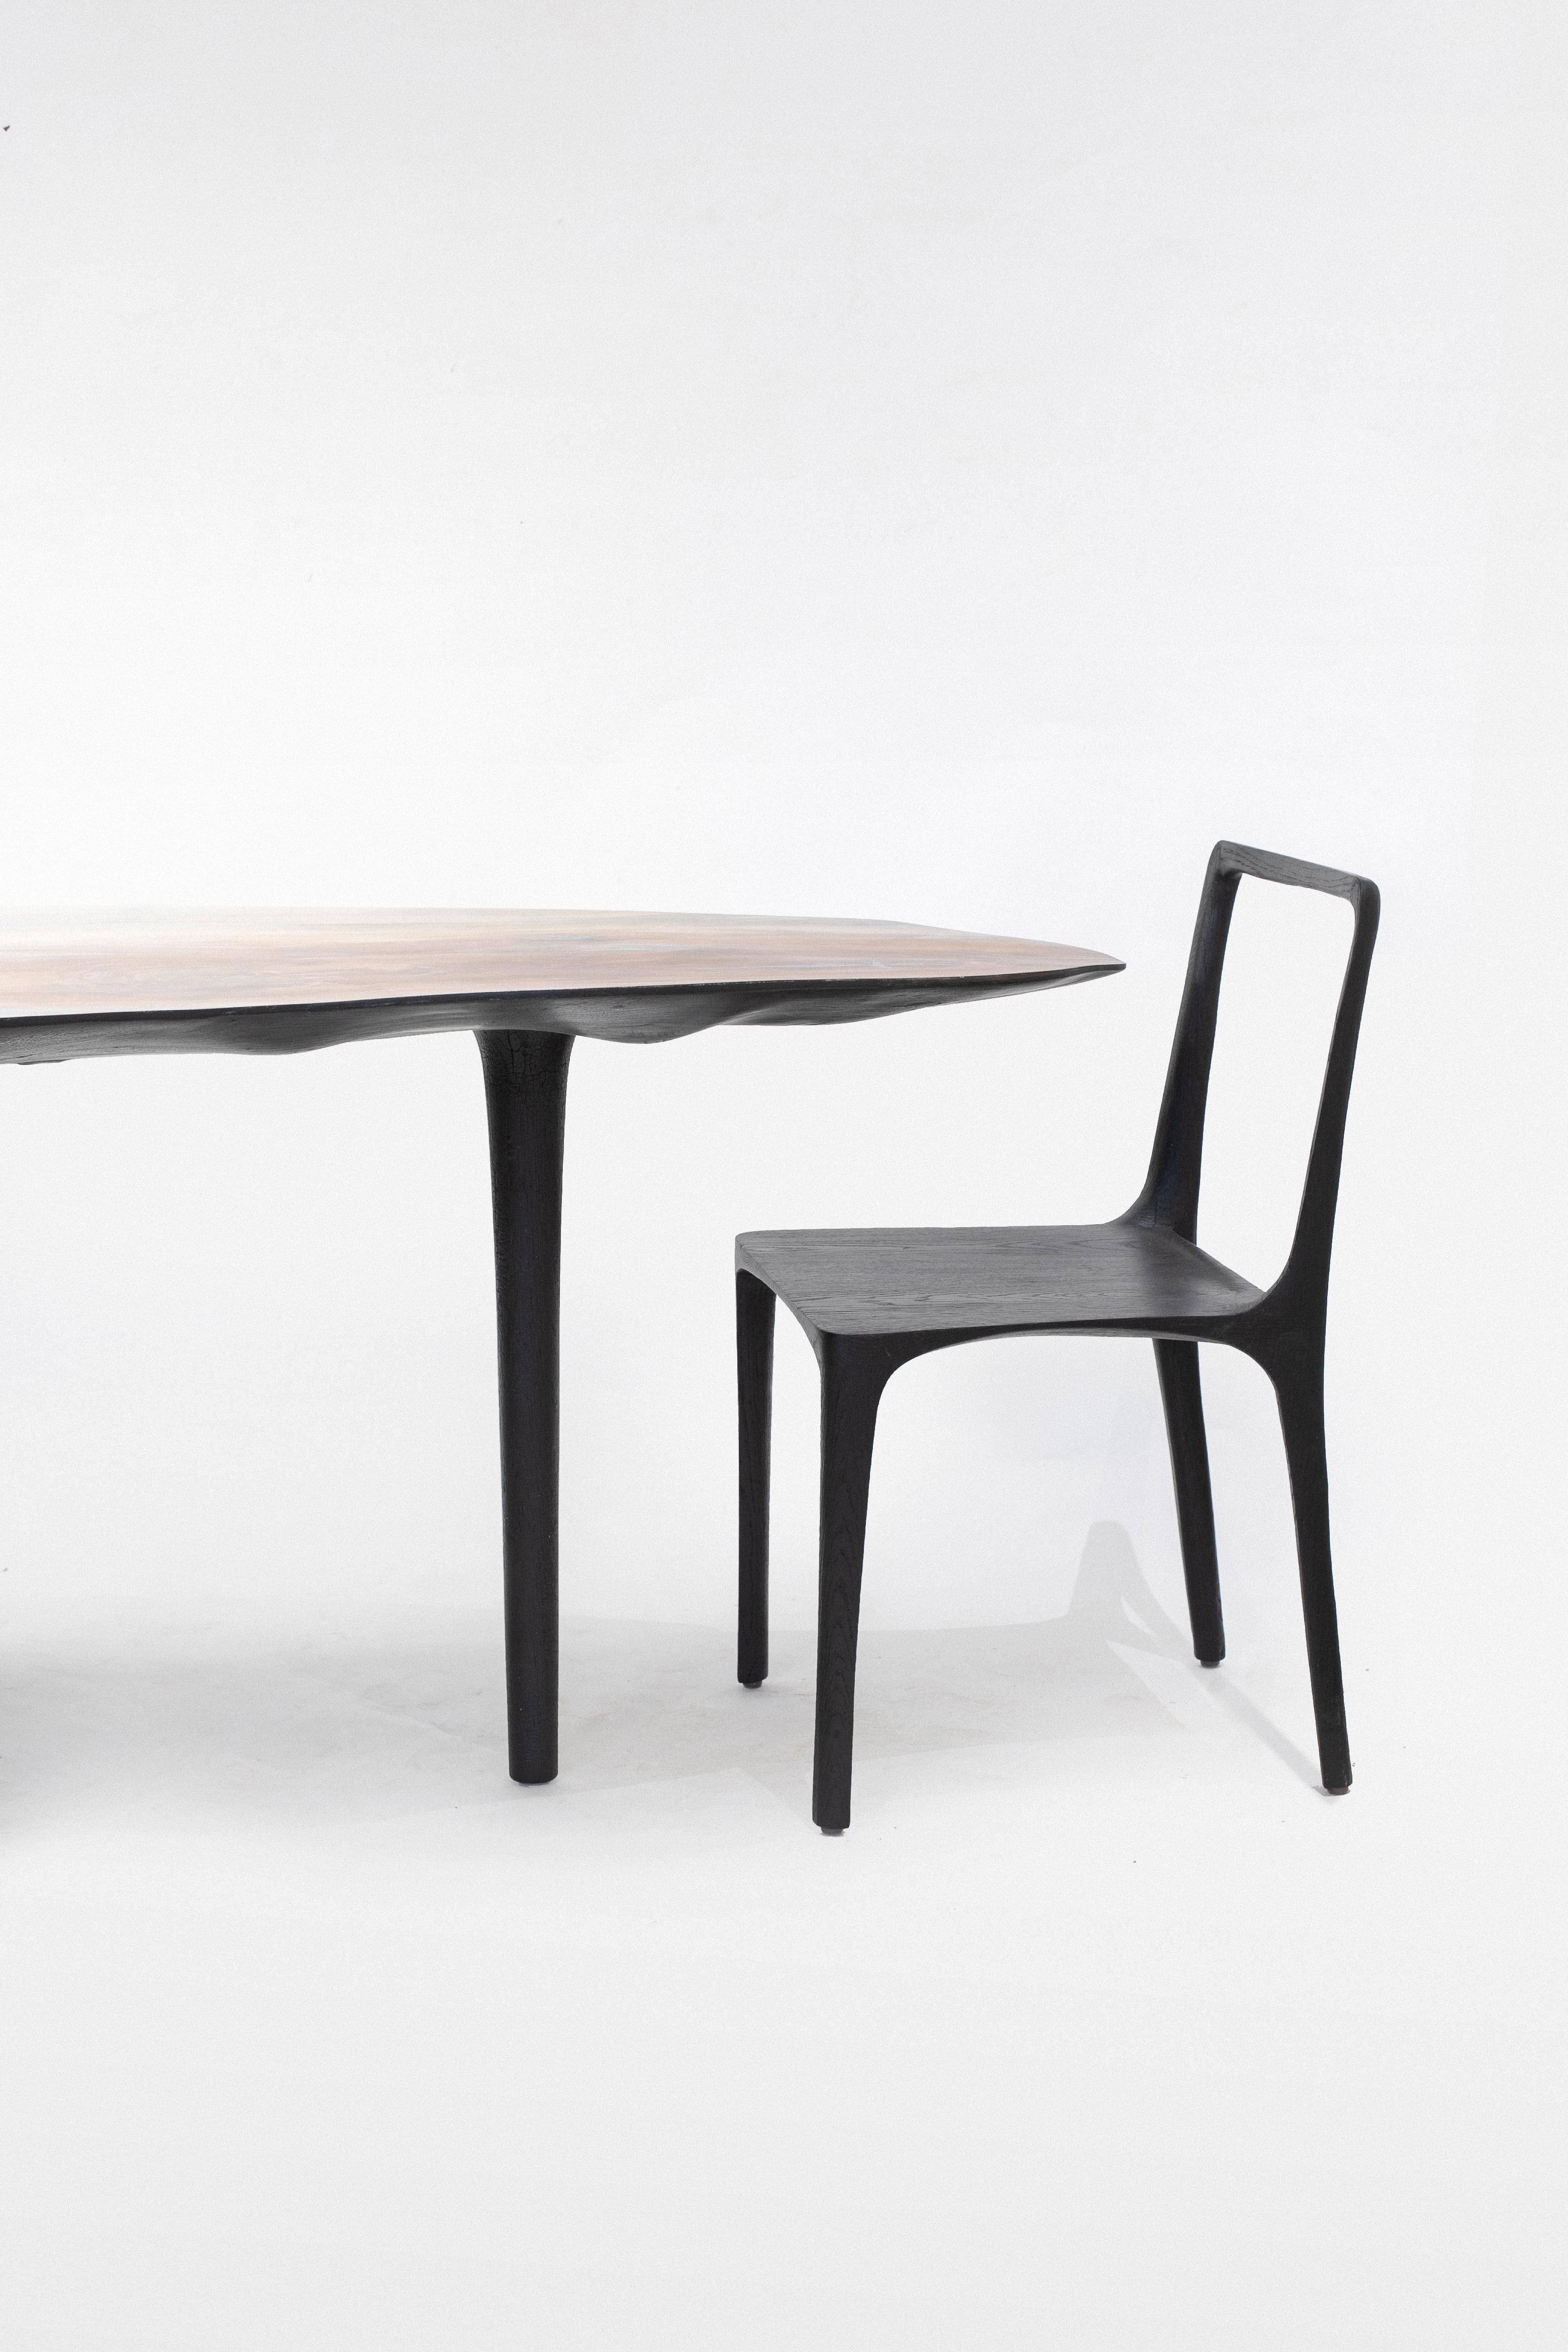 French Unique Sculptural Dining Table Signed by Cedric Breisacher